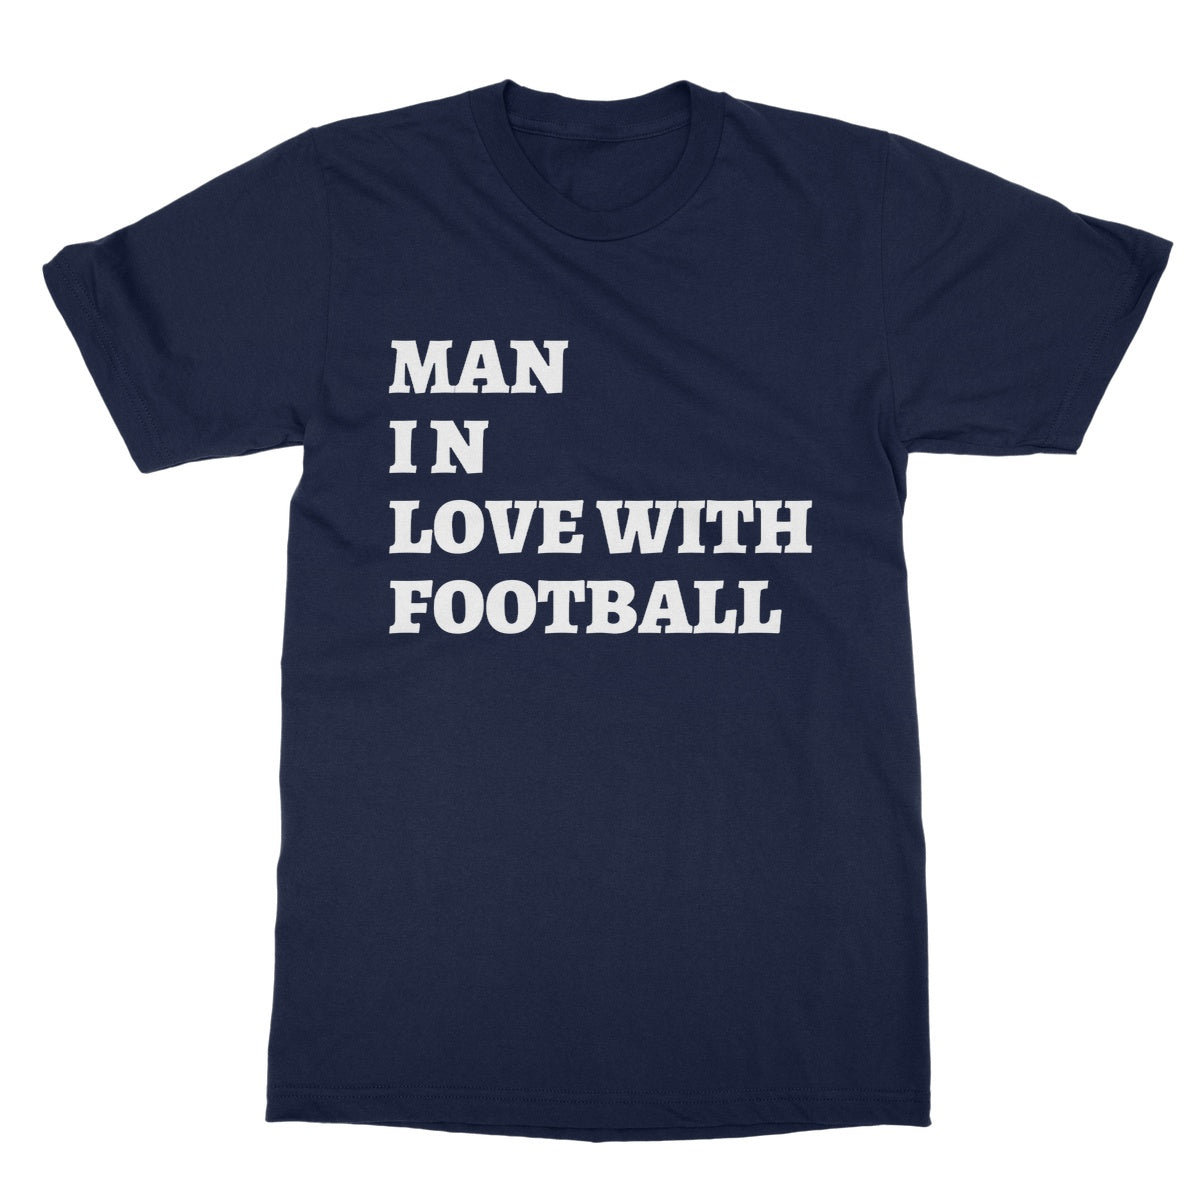 man in love with football t shirt navy